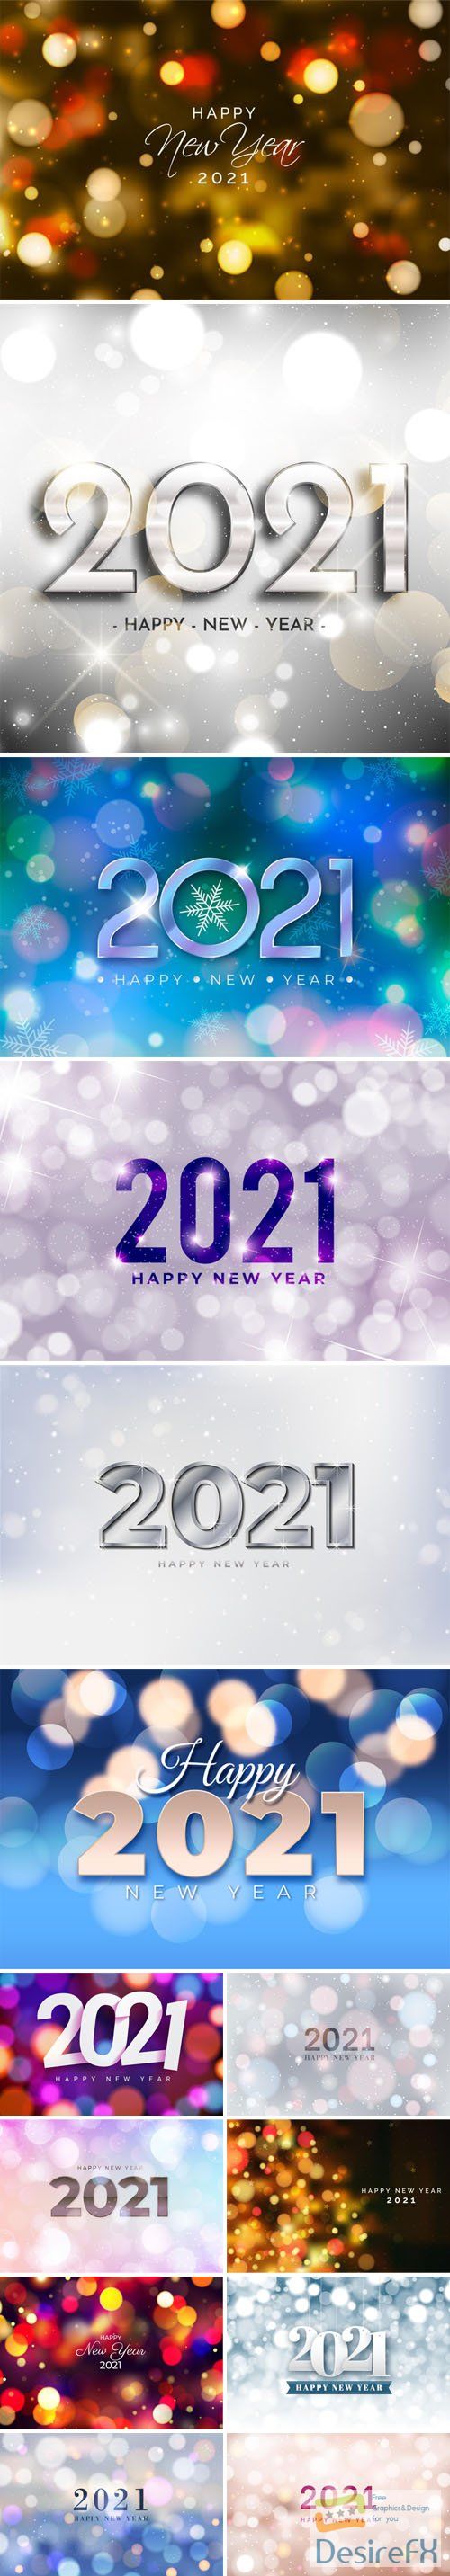 14 Happy New Year 2021 Vector Templates With Blurred Bokeh Lights